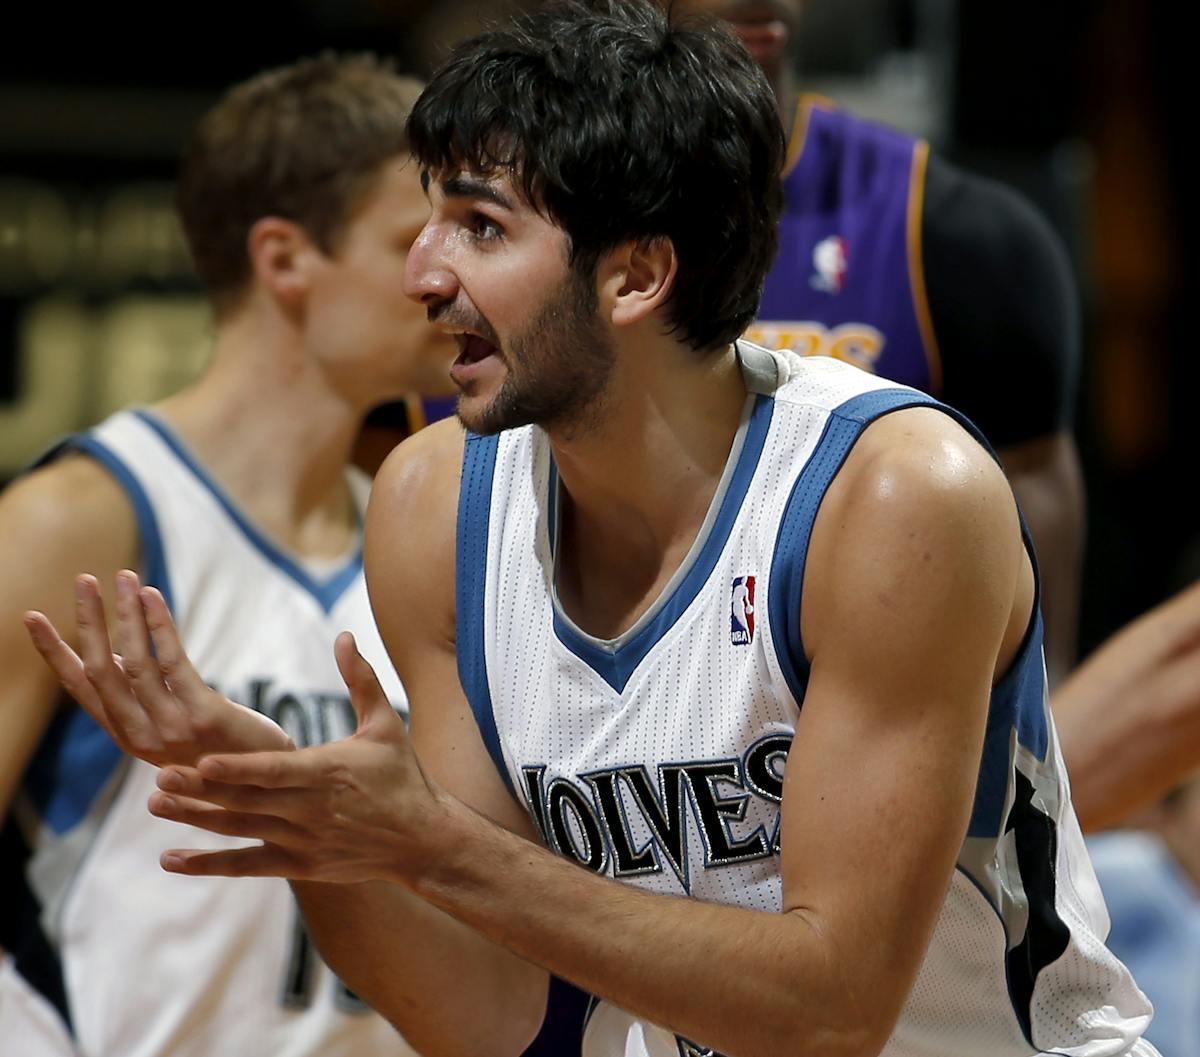 Ricky Rubio (9) pleaded to a referee after he thought he was fouled after taking the last shot of the game. LA beat Minnesota by a final score of 120-